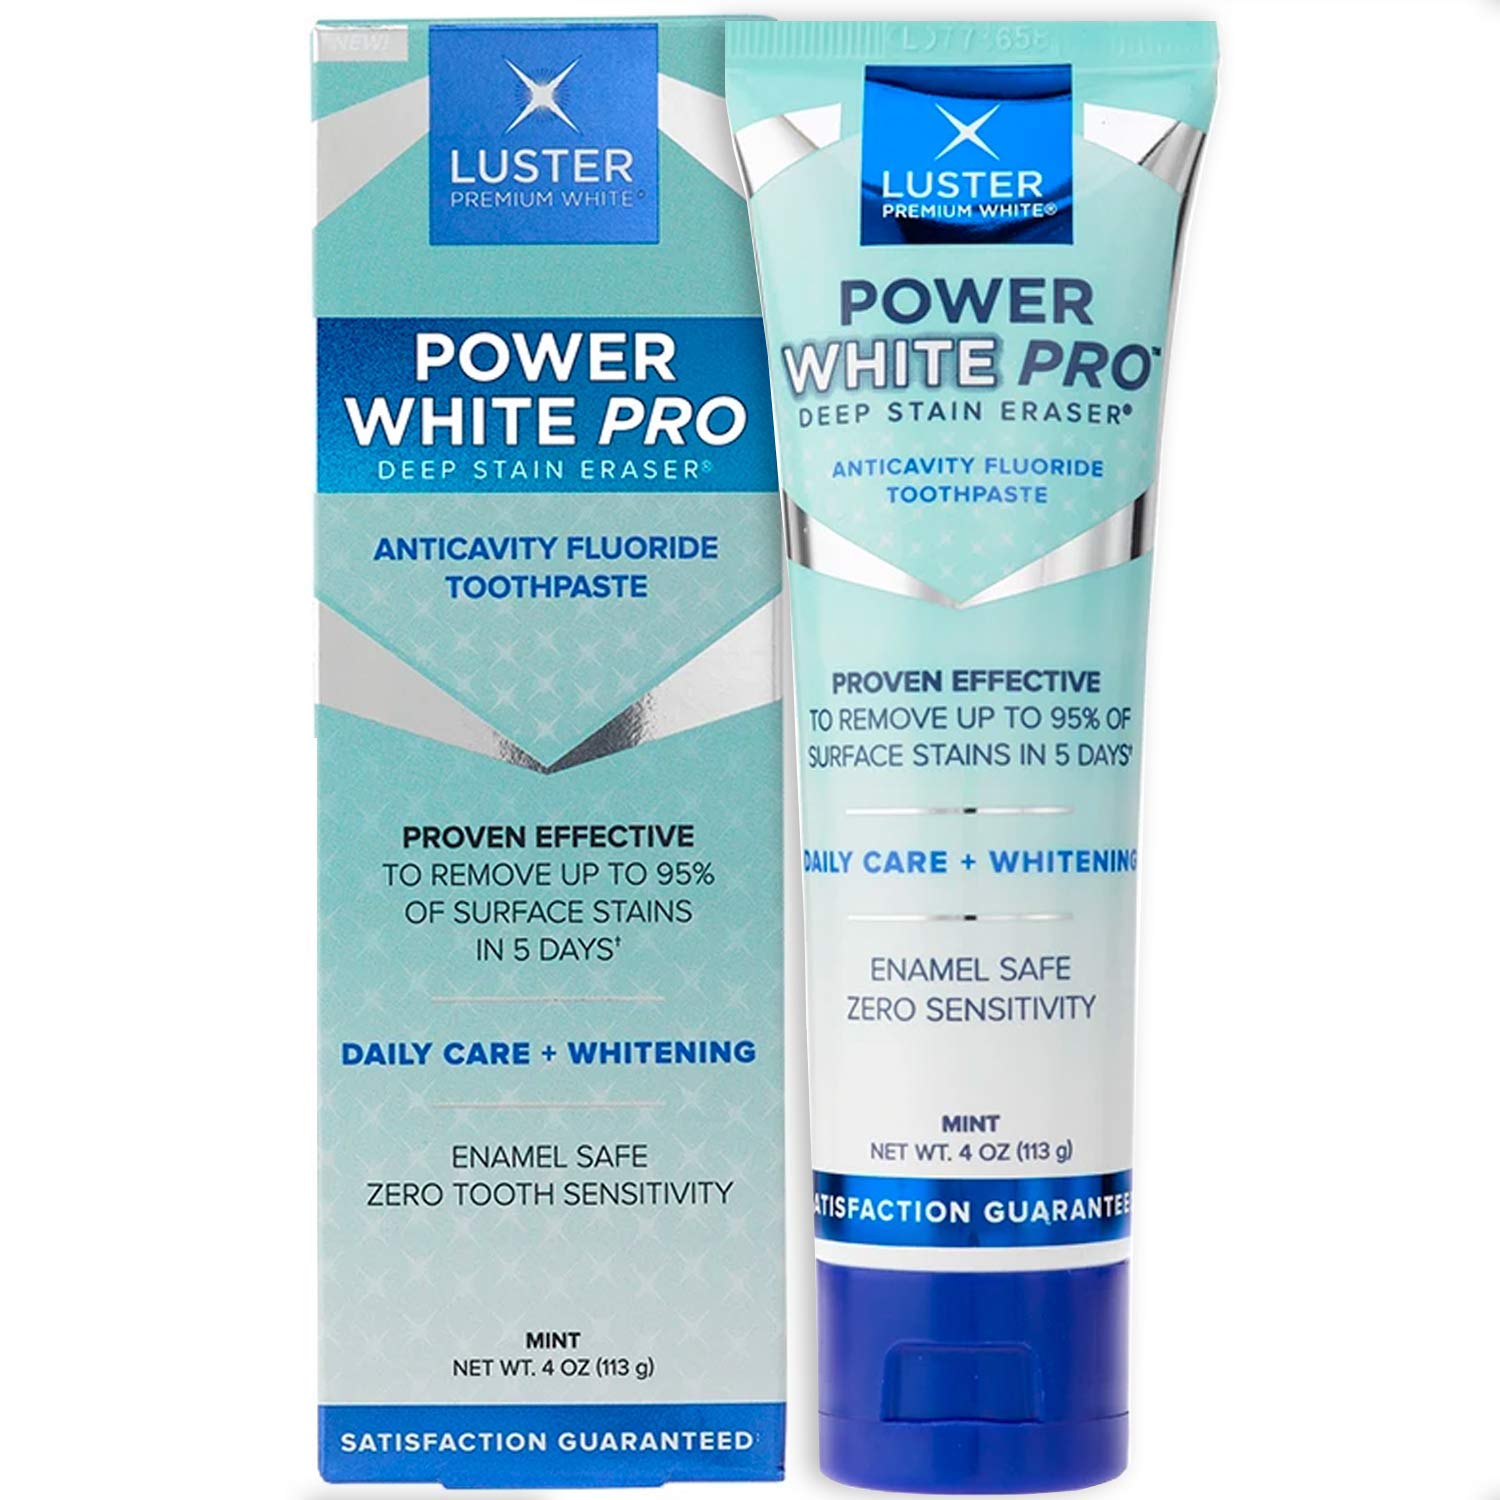 Luster Power White Pro Deep Stain Eraser Anticavity Fluoride, Enamel-Safe & Effective Professional Teeth Whitening Toothpaste, Mint, 4 oz - image 1 of 5